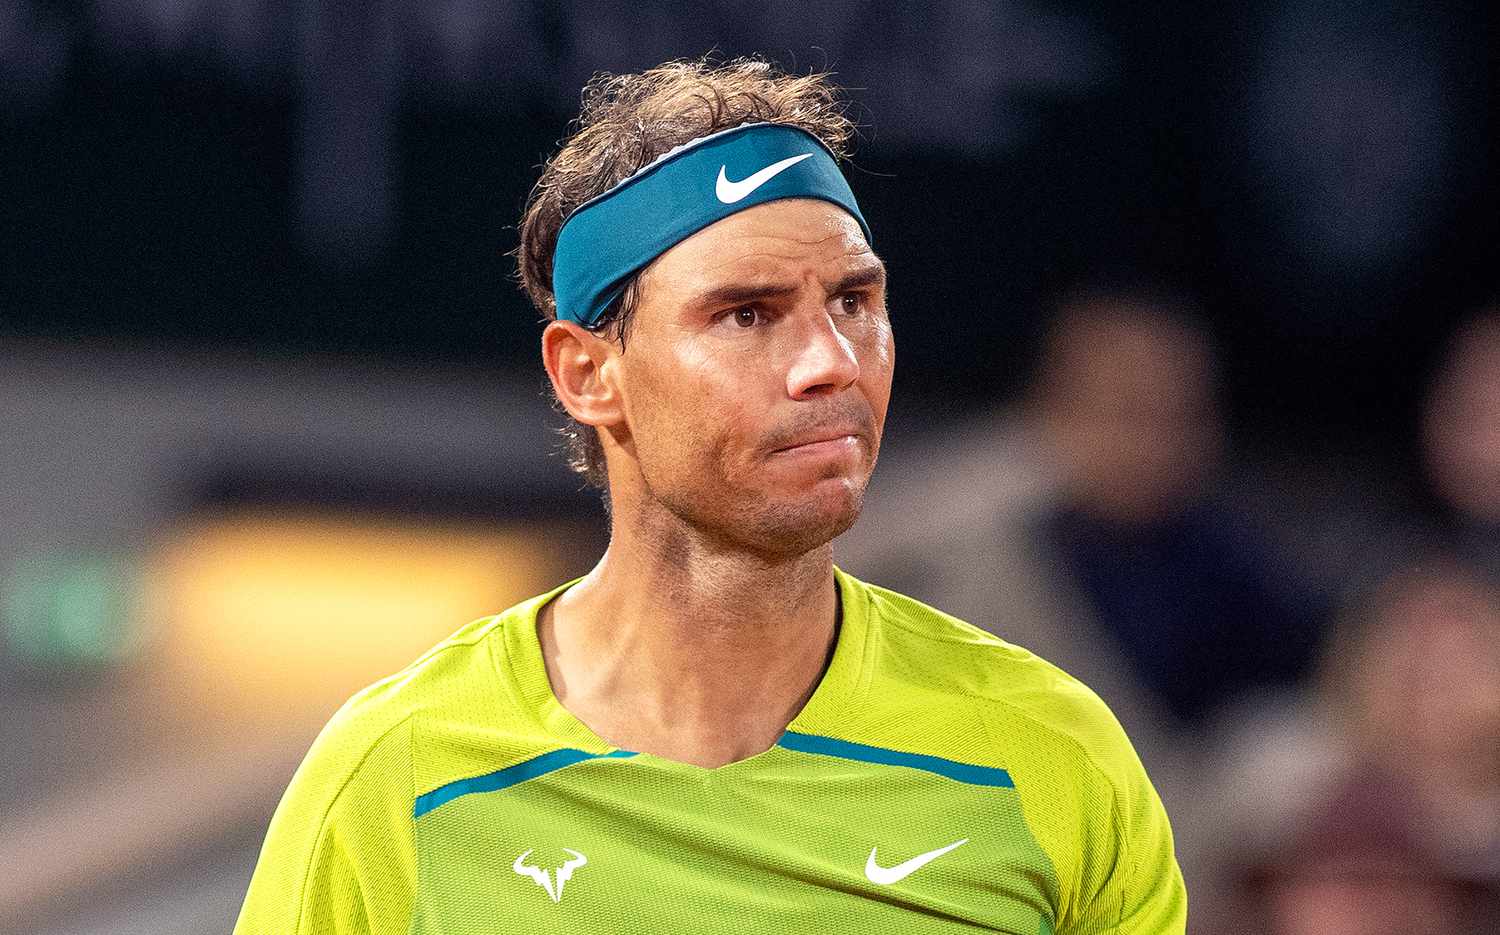 BREAKING NEWS:This the main reason why rafel nadal is not going to play in the indian wells…